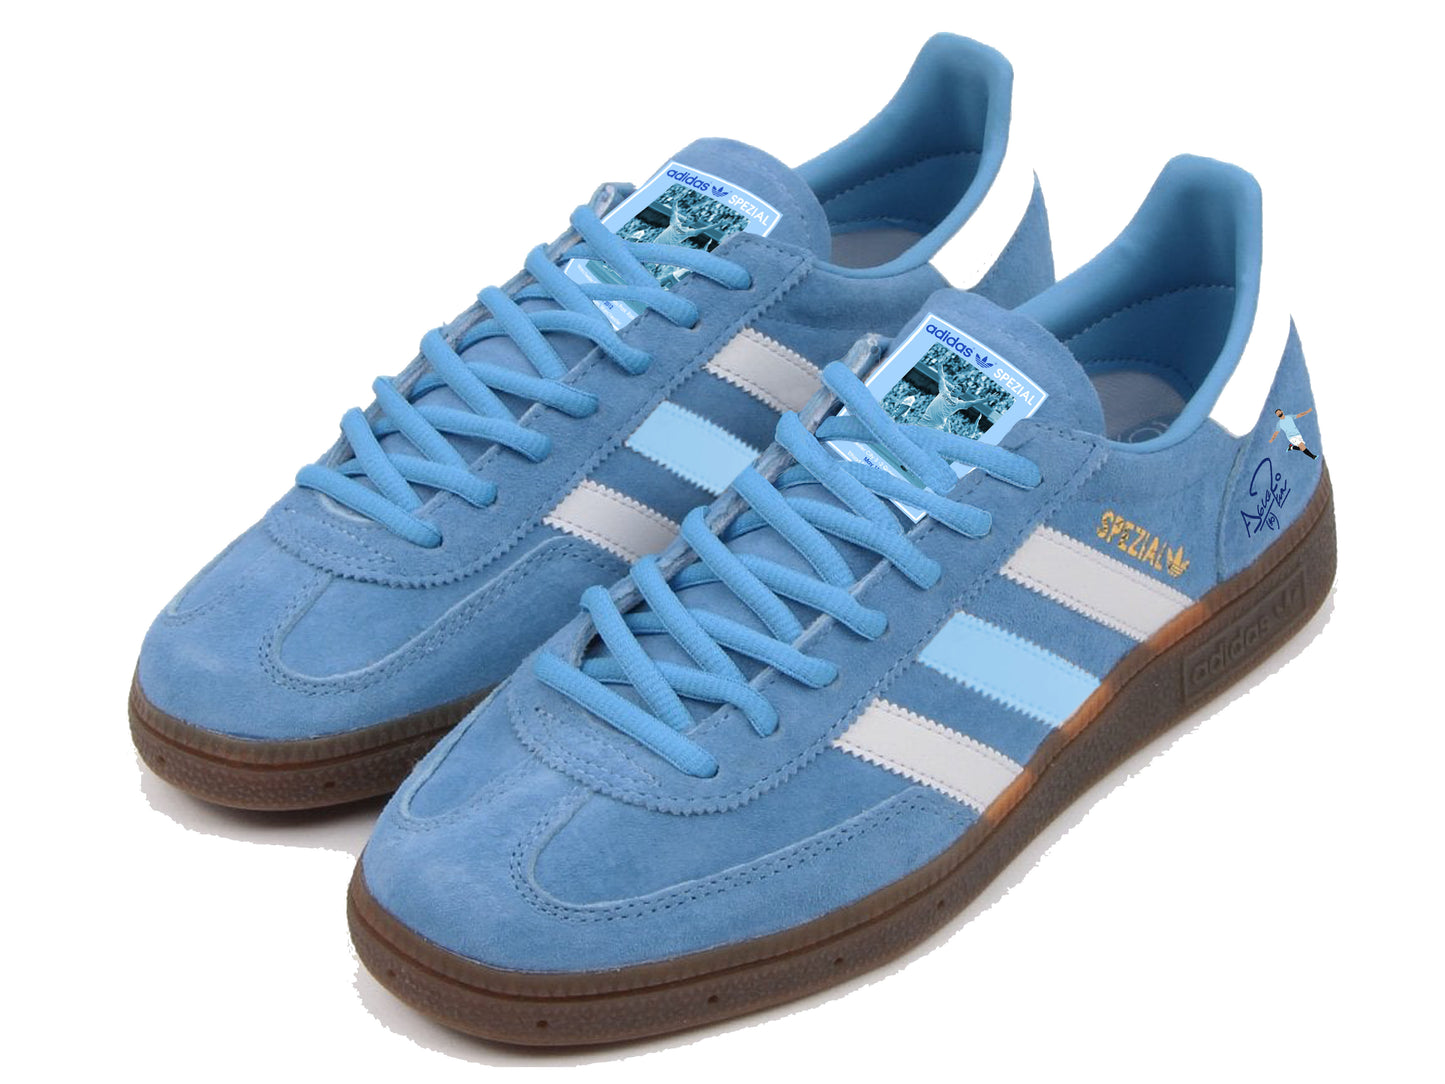 Limited edition Manchester City Sergio Aguero inspired Blue /White/ Adidas Handball Spezial trainers / sneakers